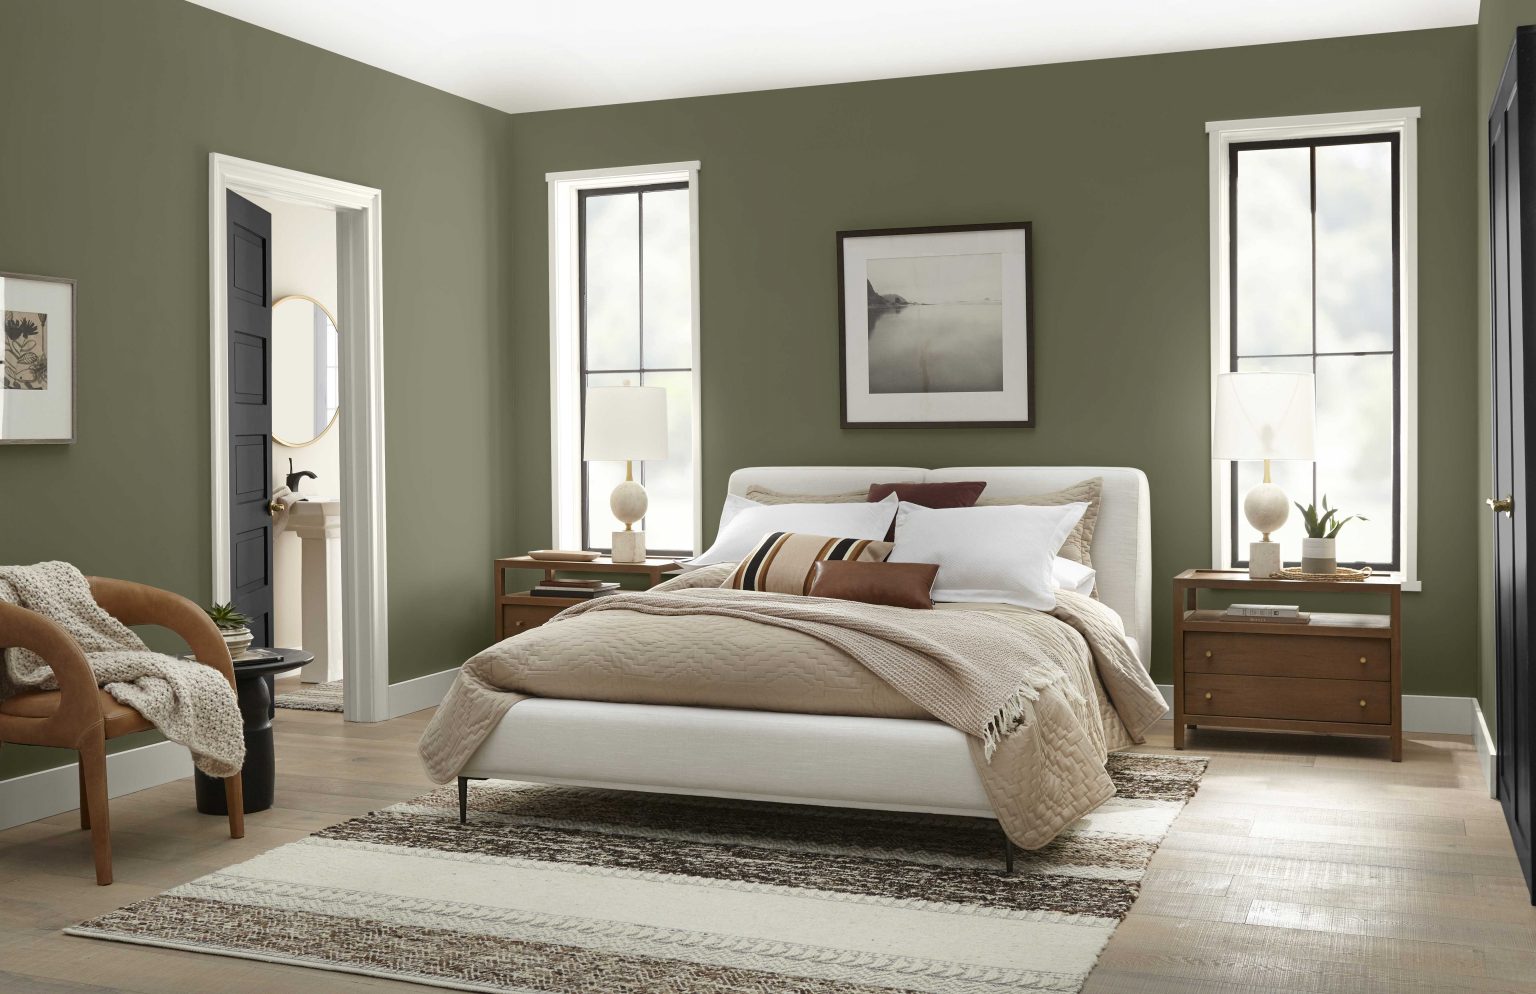 A master bedroom with walls painted in a deep olive green, styled with neutral bedding and décor